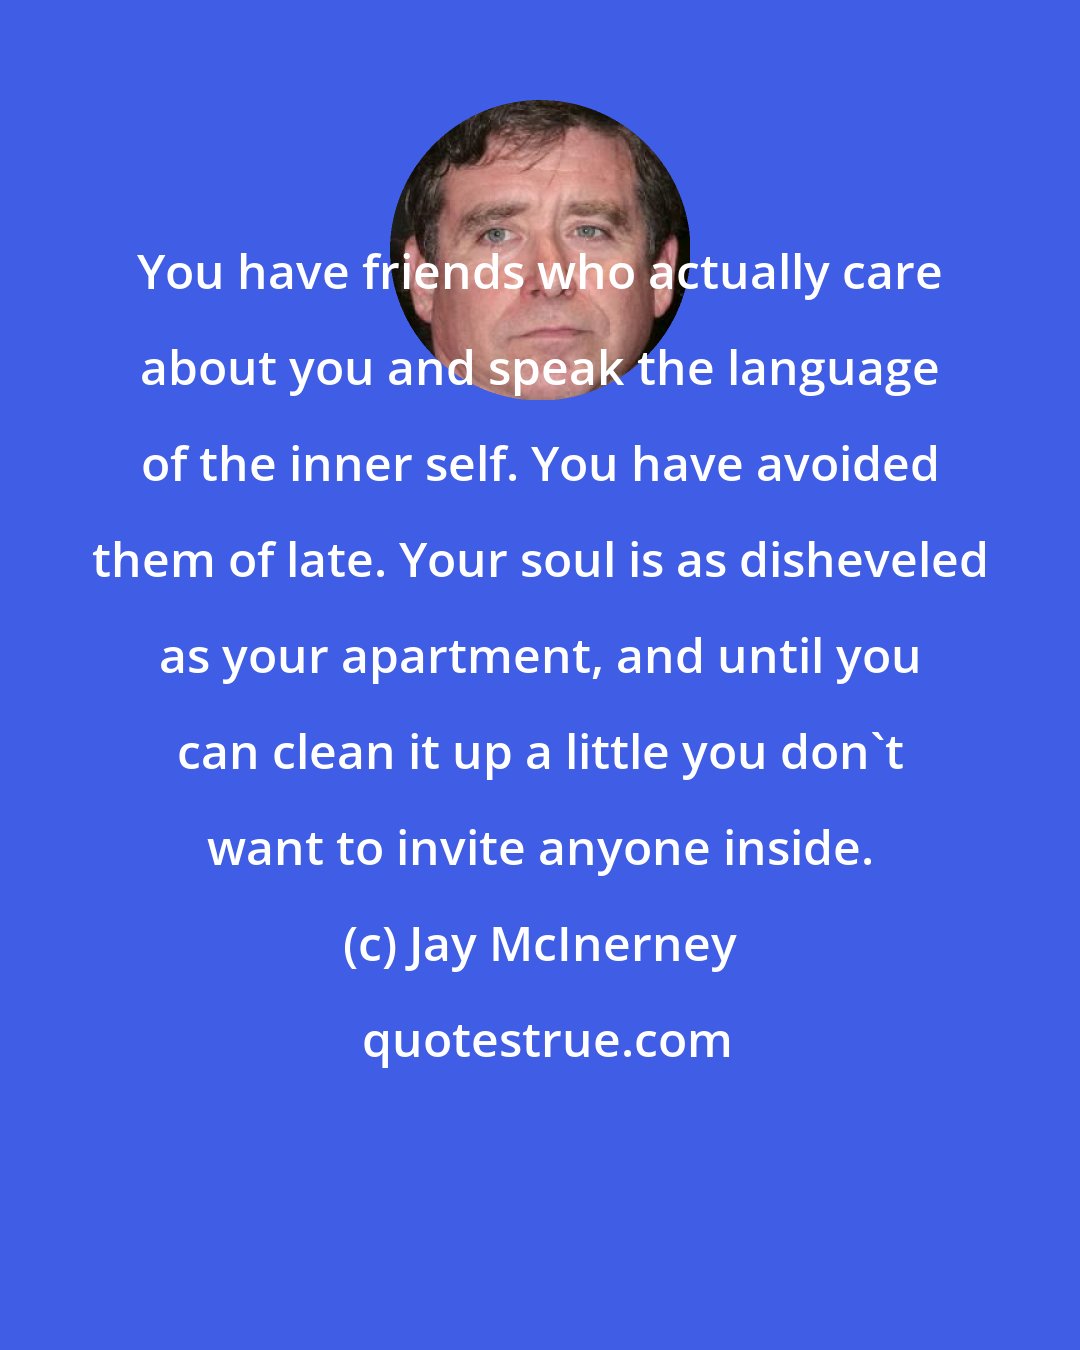 Jay McInerney: You have friends who actually care about you and speak the language of the inner self. You have avoided them of late. Your soul is as disheveled as your apartment, and until you can clean it up a little you don't want to invite anyone inside.